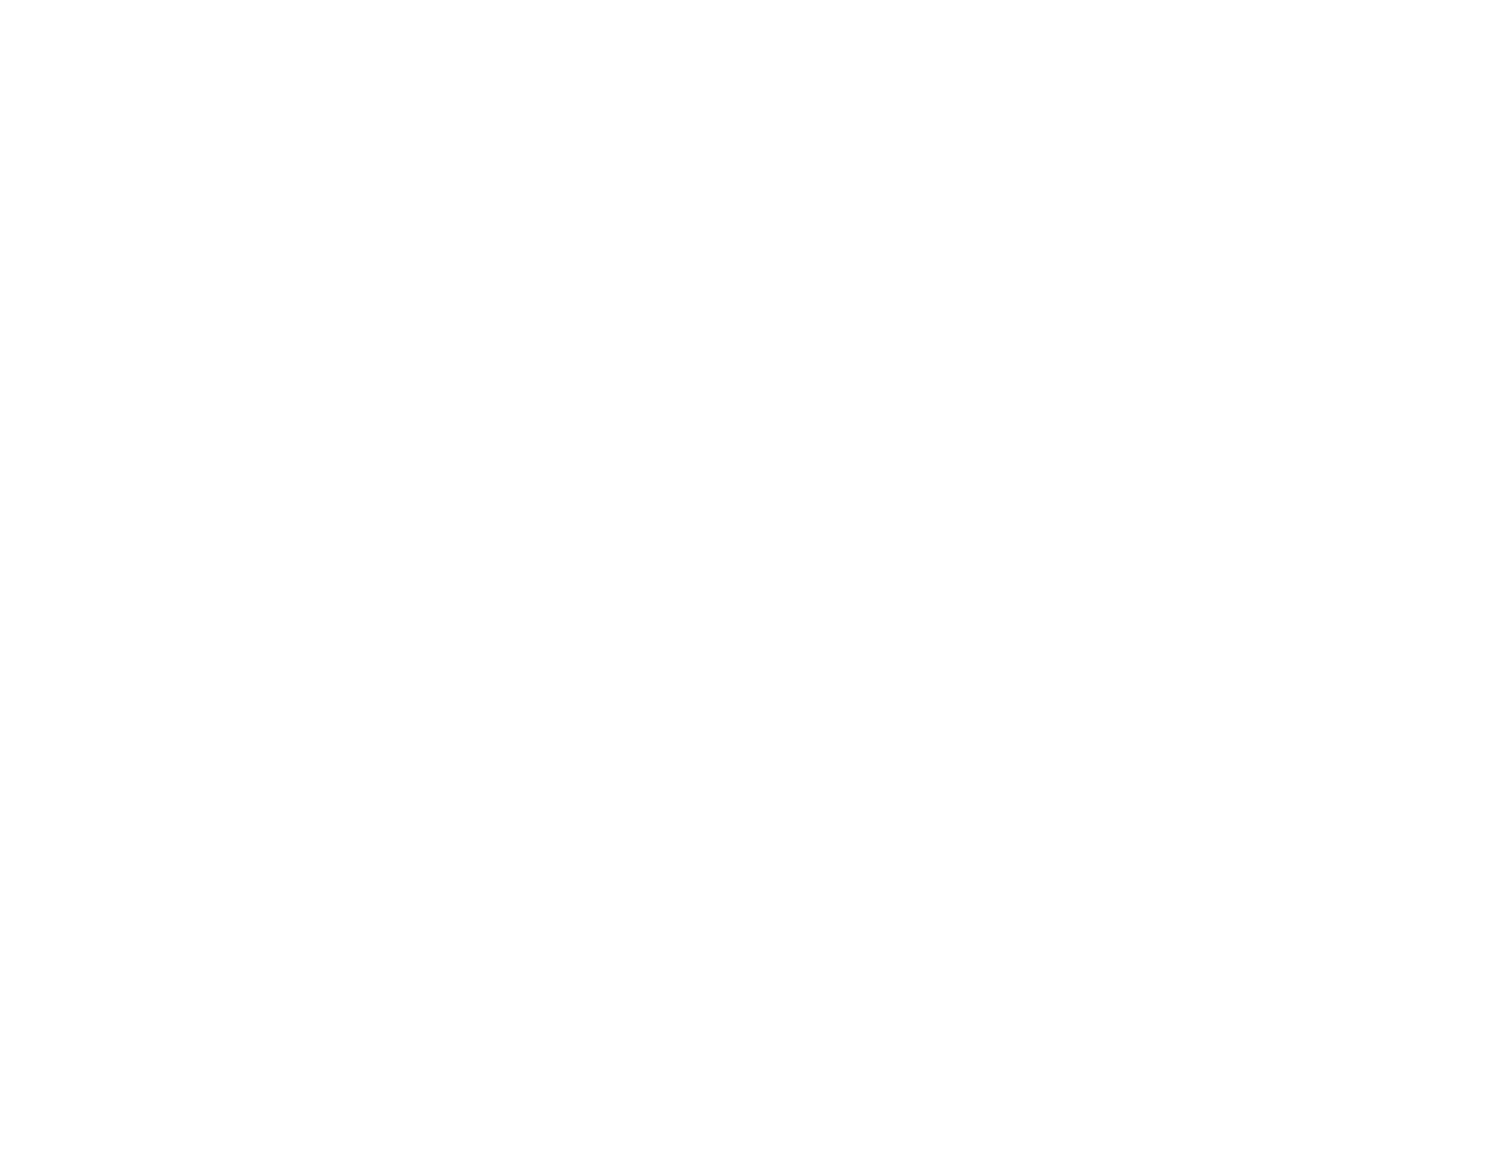 DD AirBags - AirBags pour tous les sports d'action